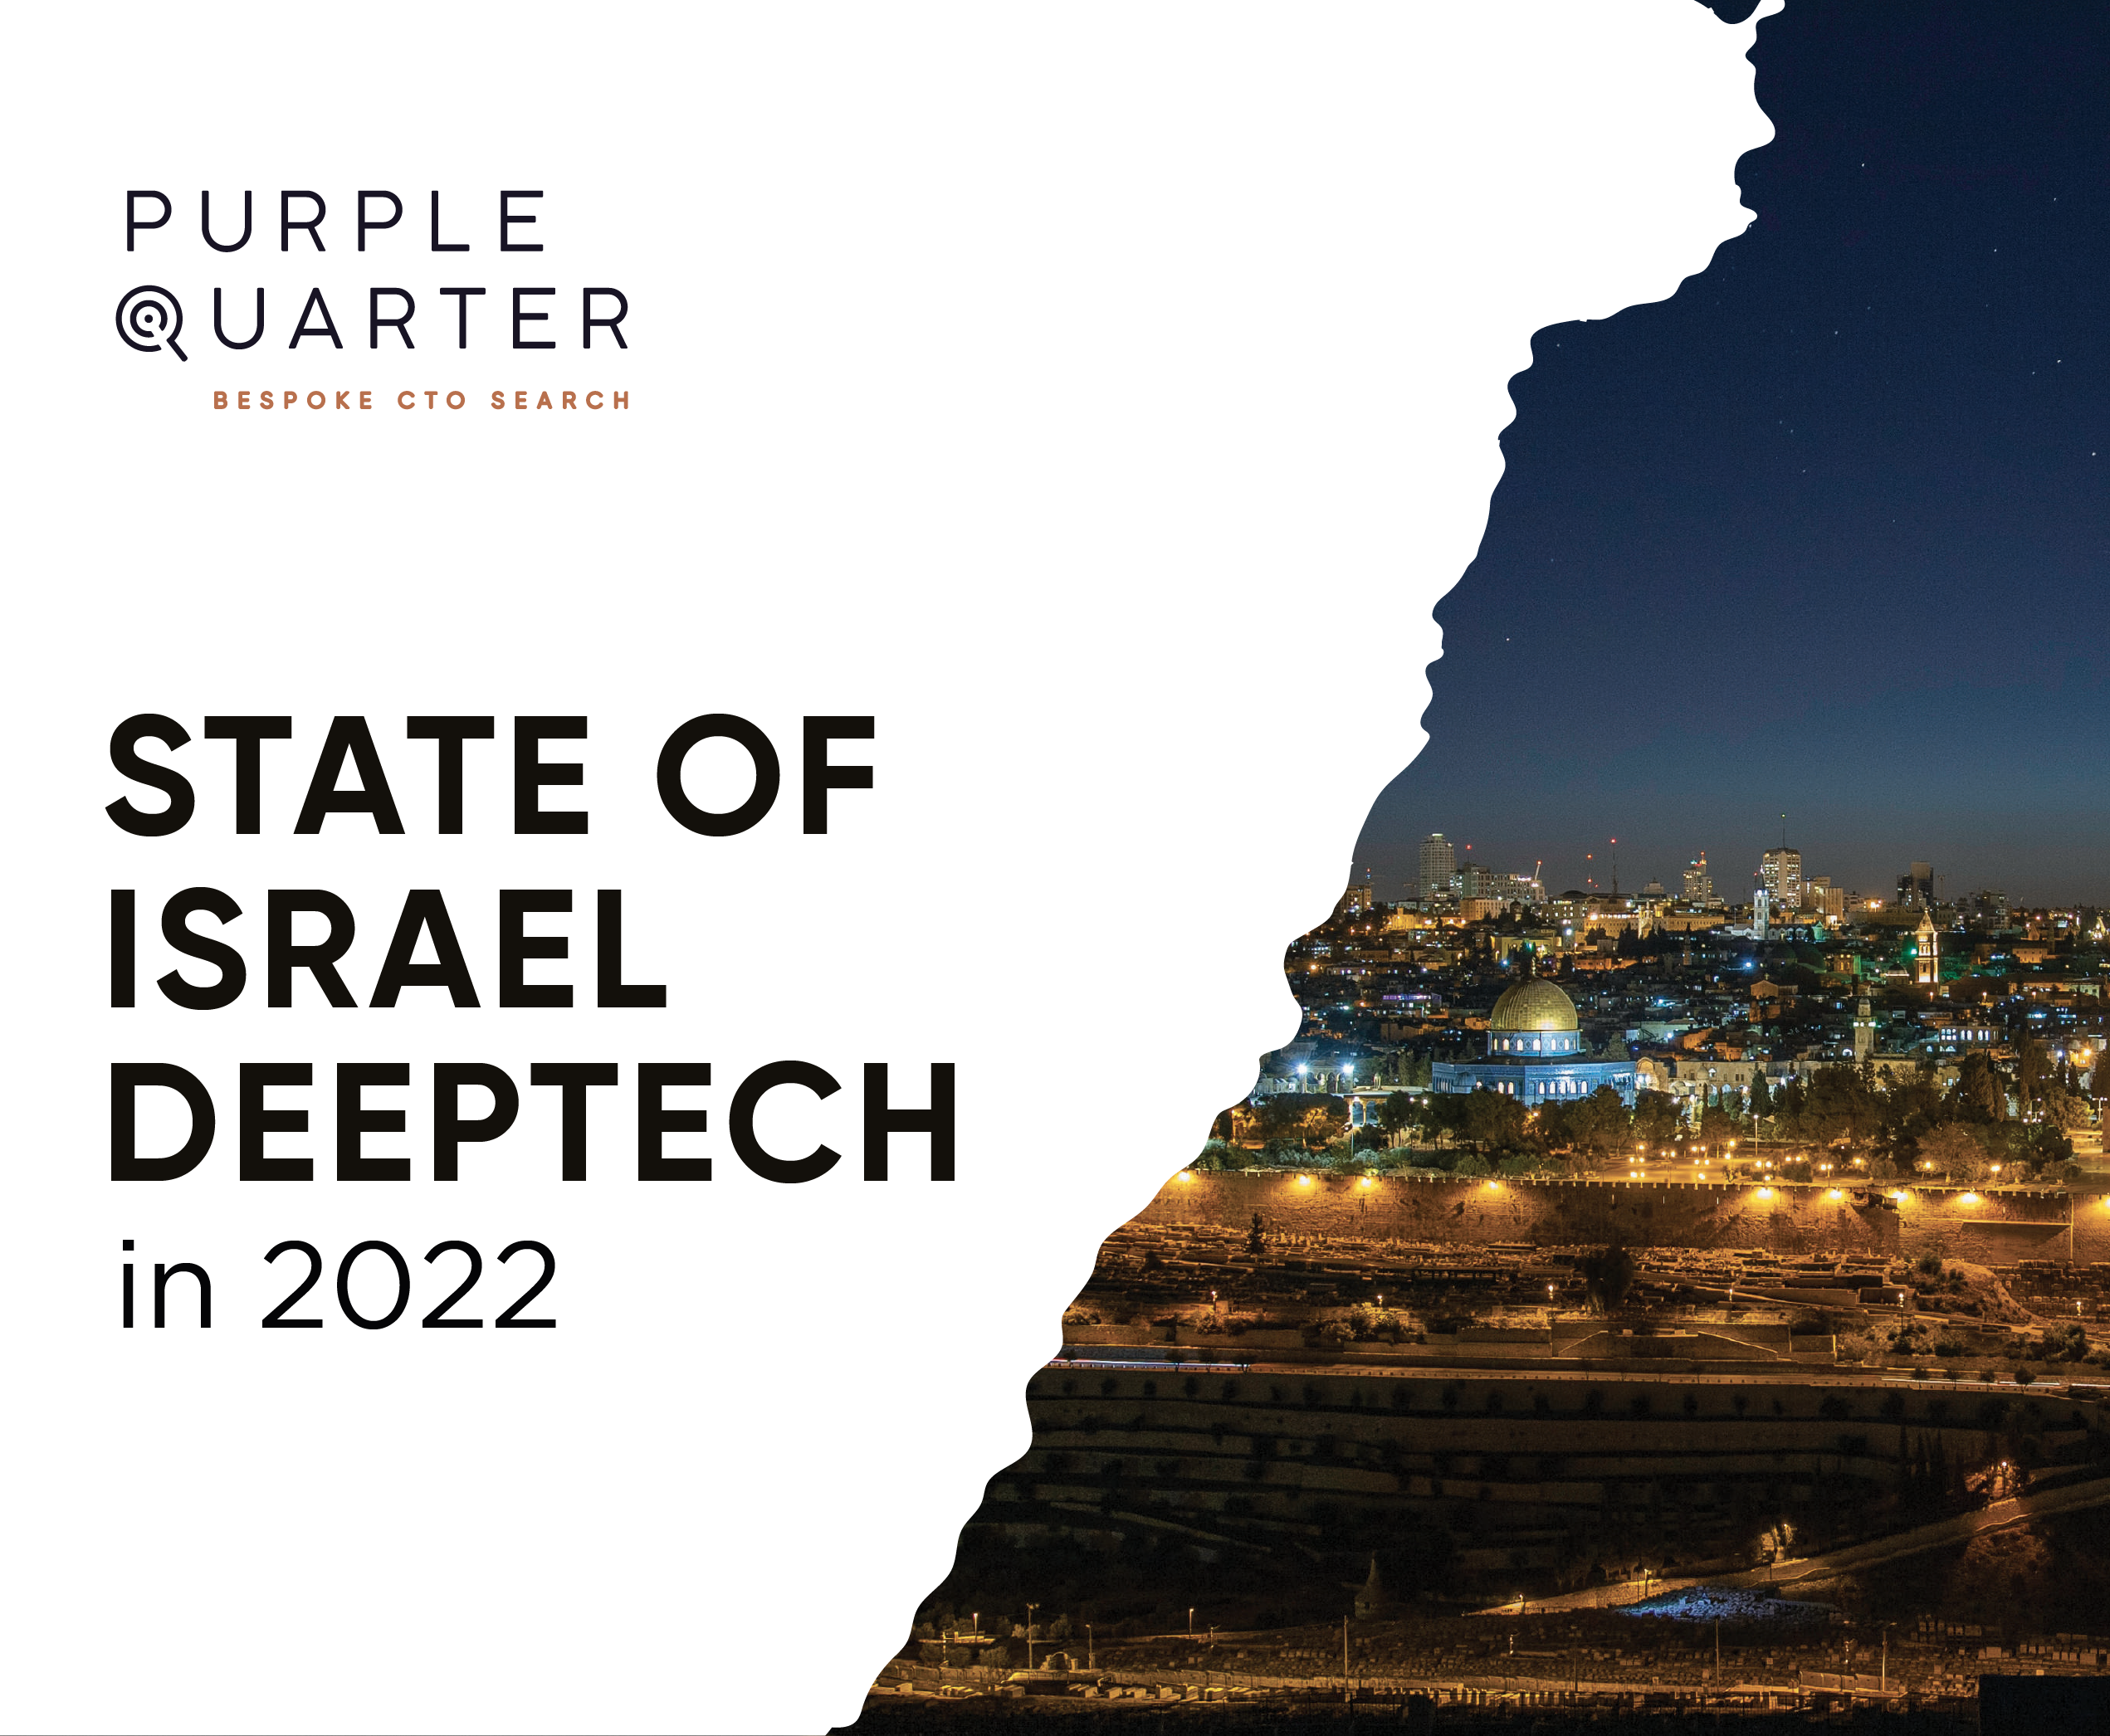 State of Israel Deeptech in 2022